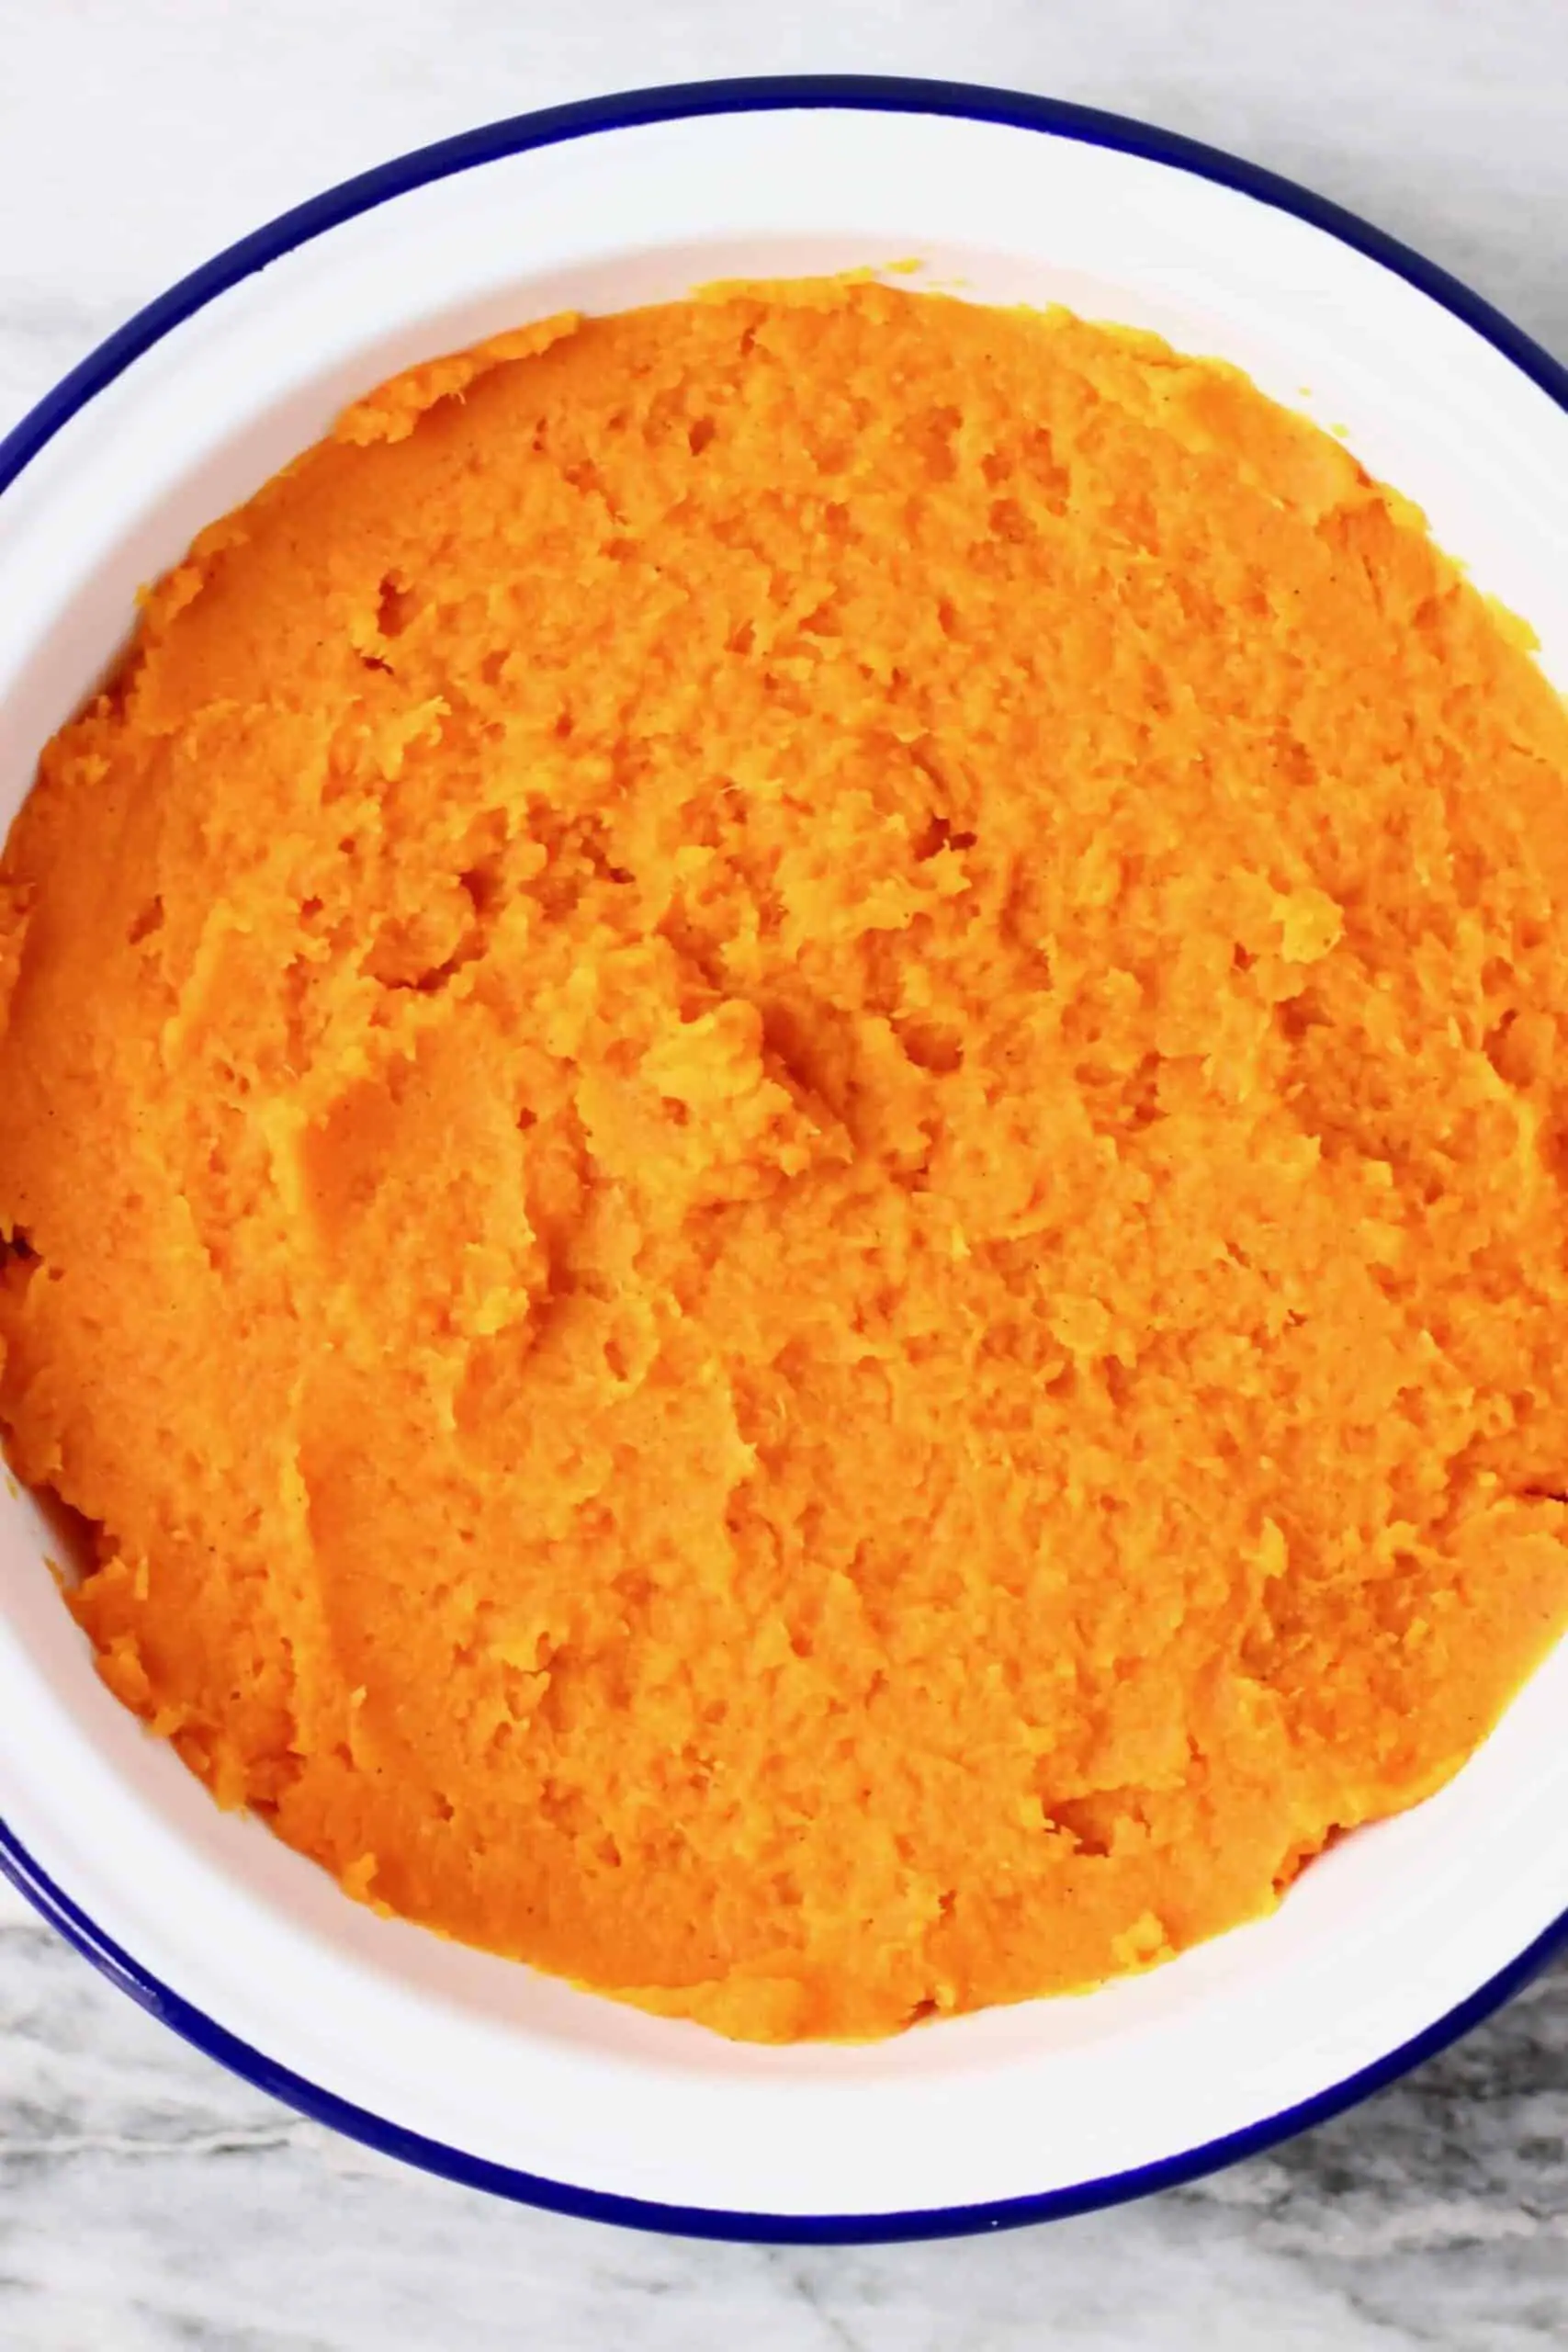 Mashed sweet potatoes in a pie dish